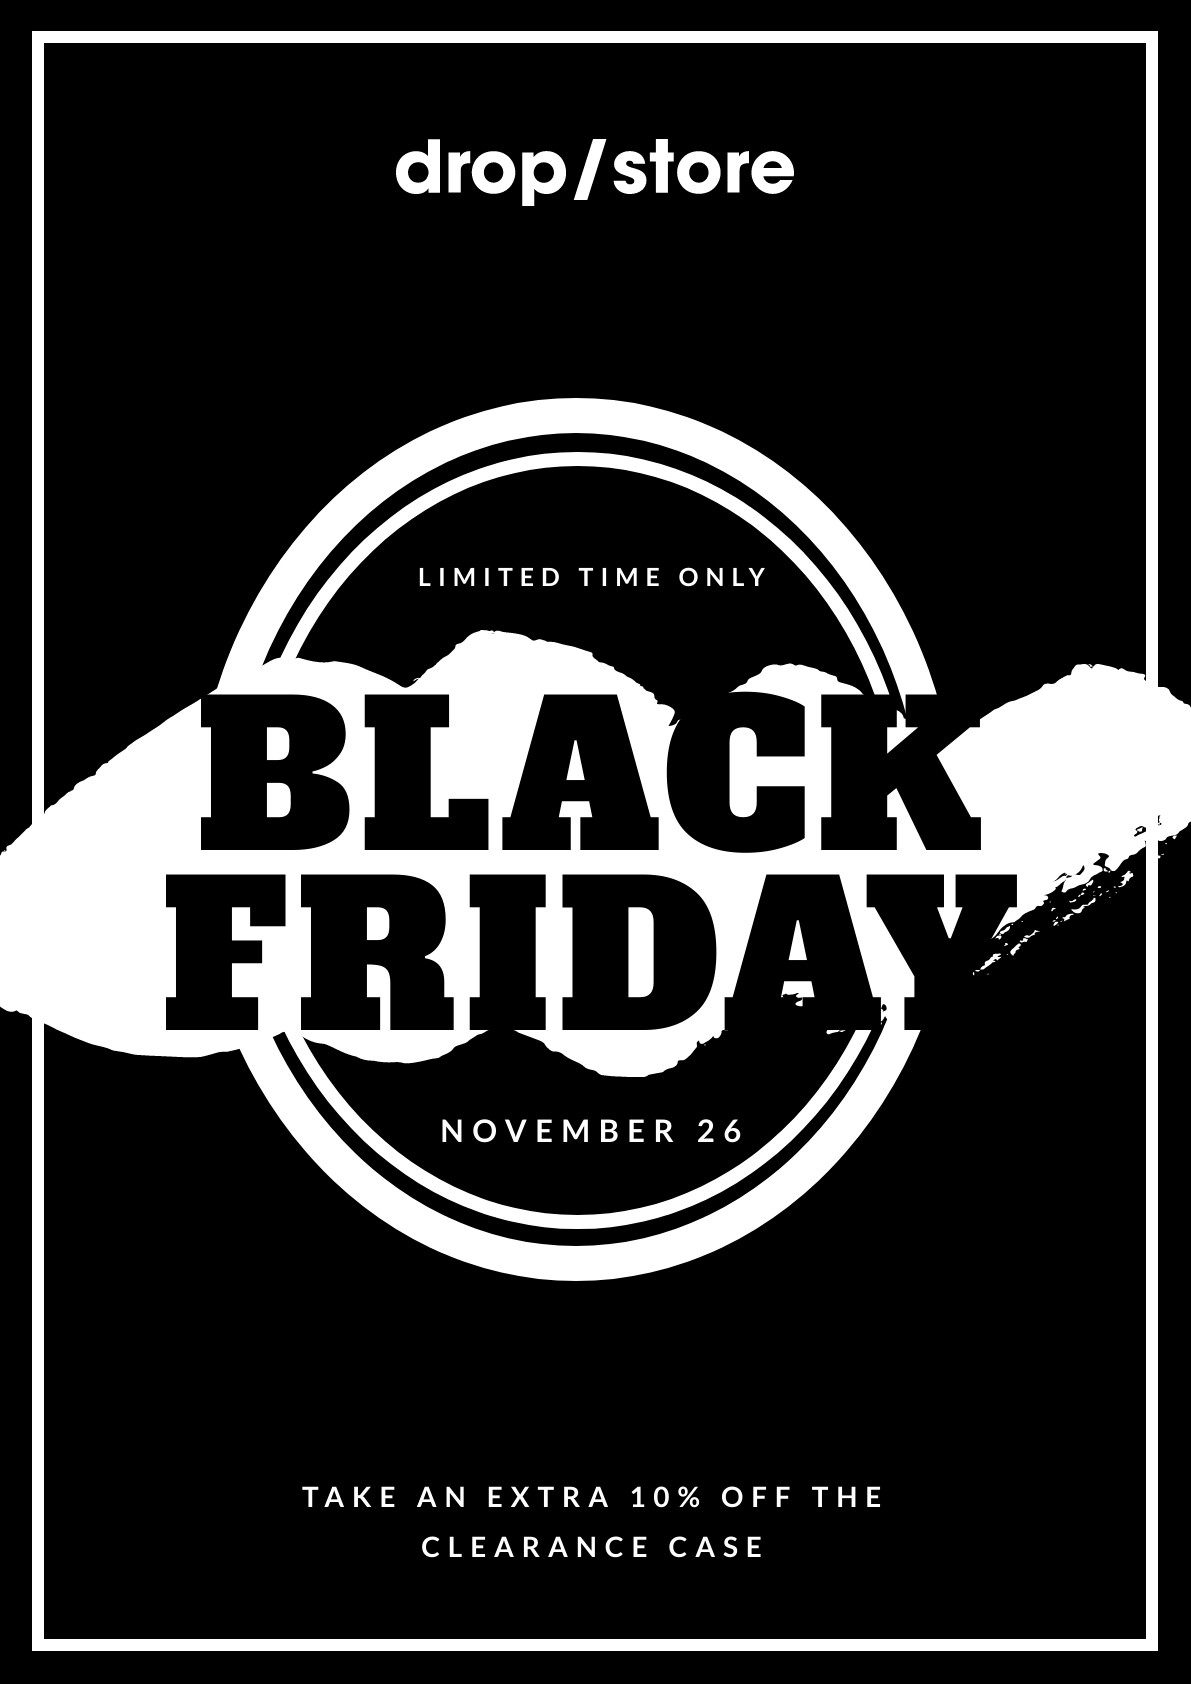 Black Friday Torn Drop Store Poster 1191x1684